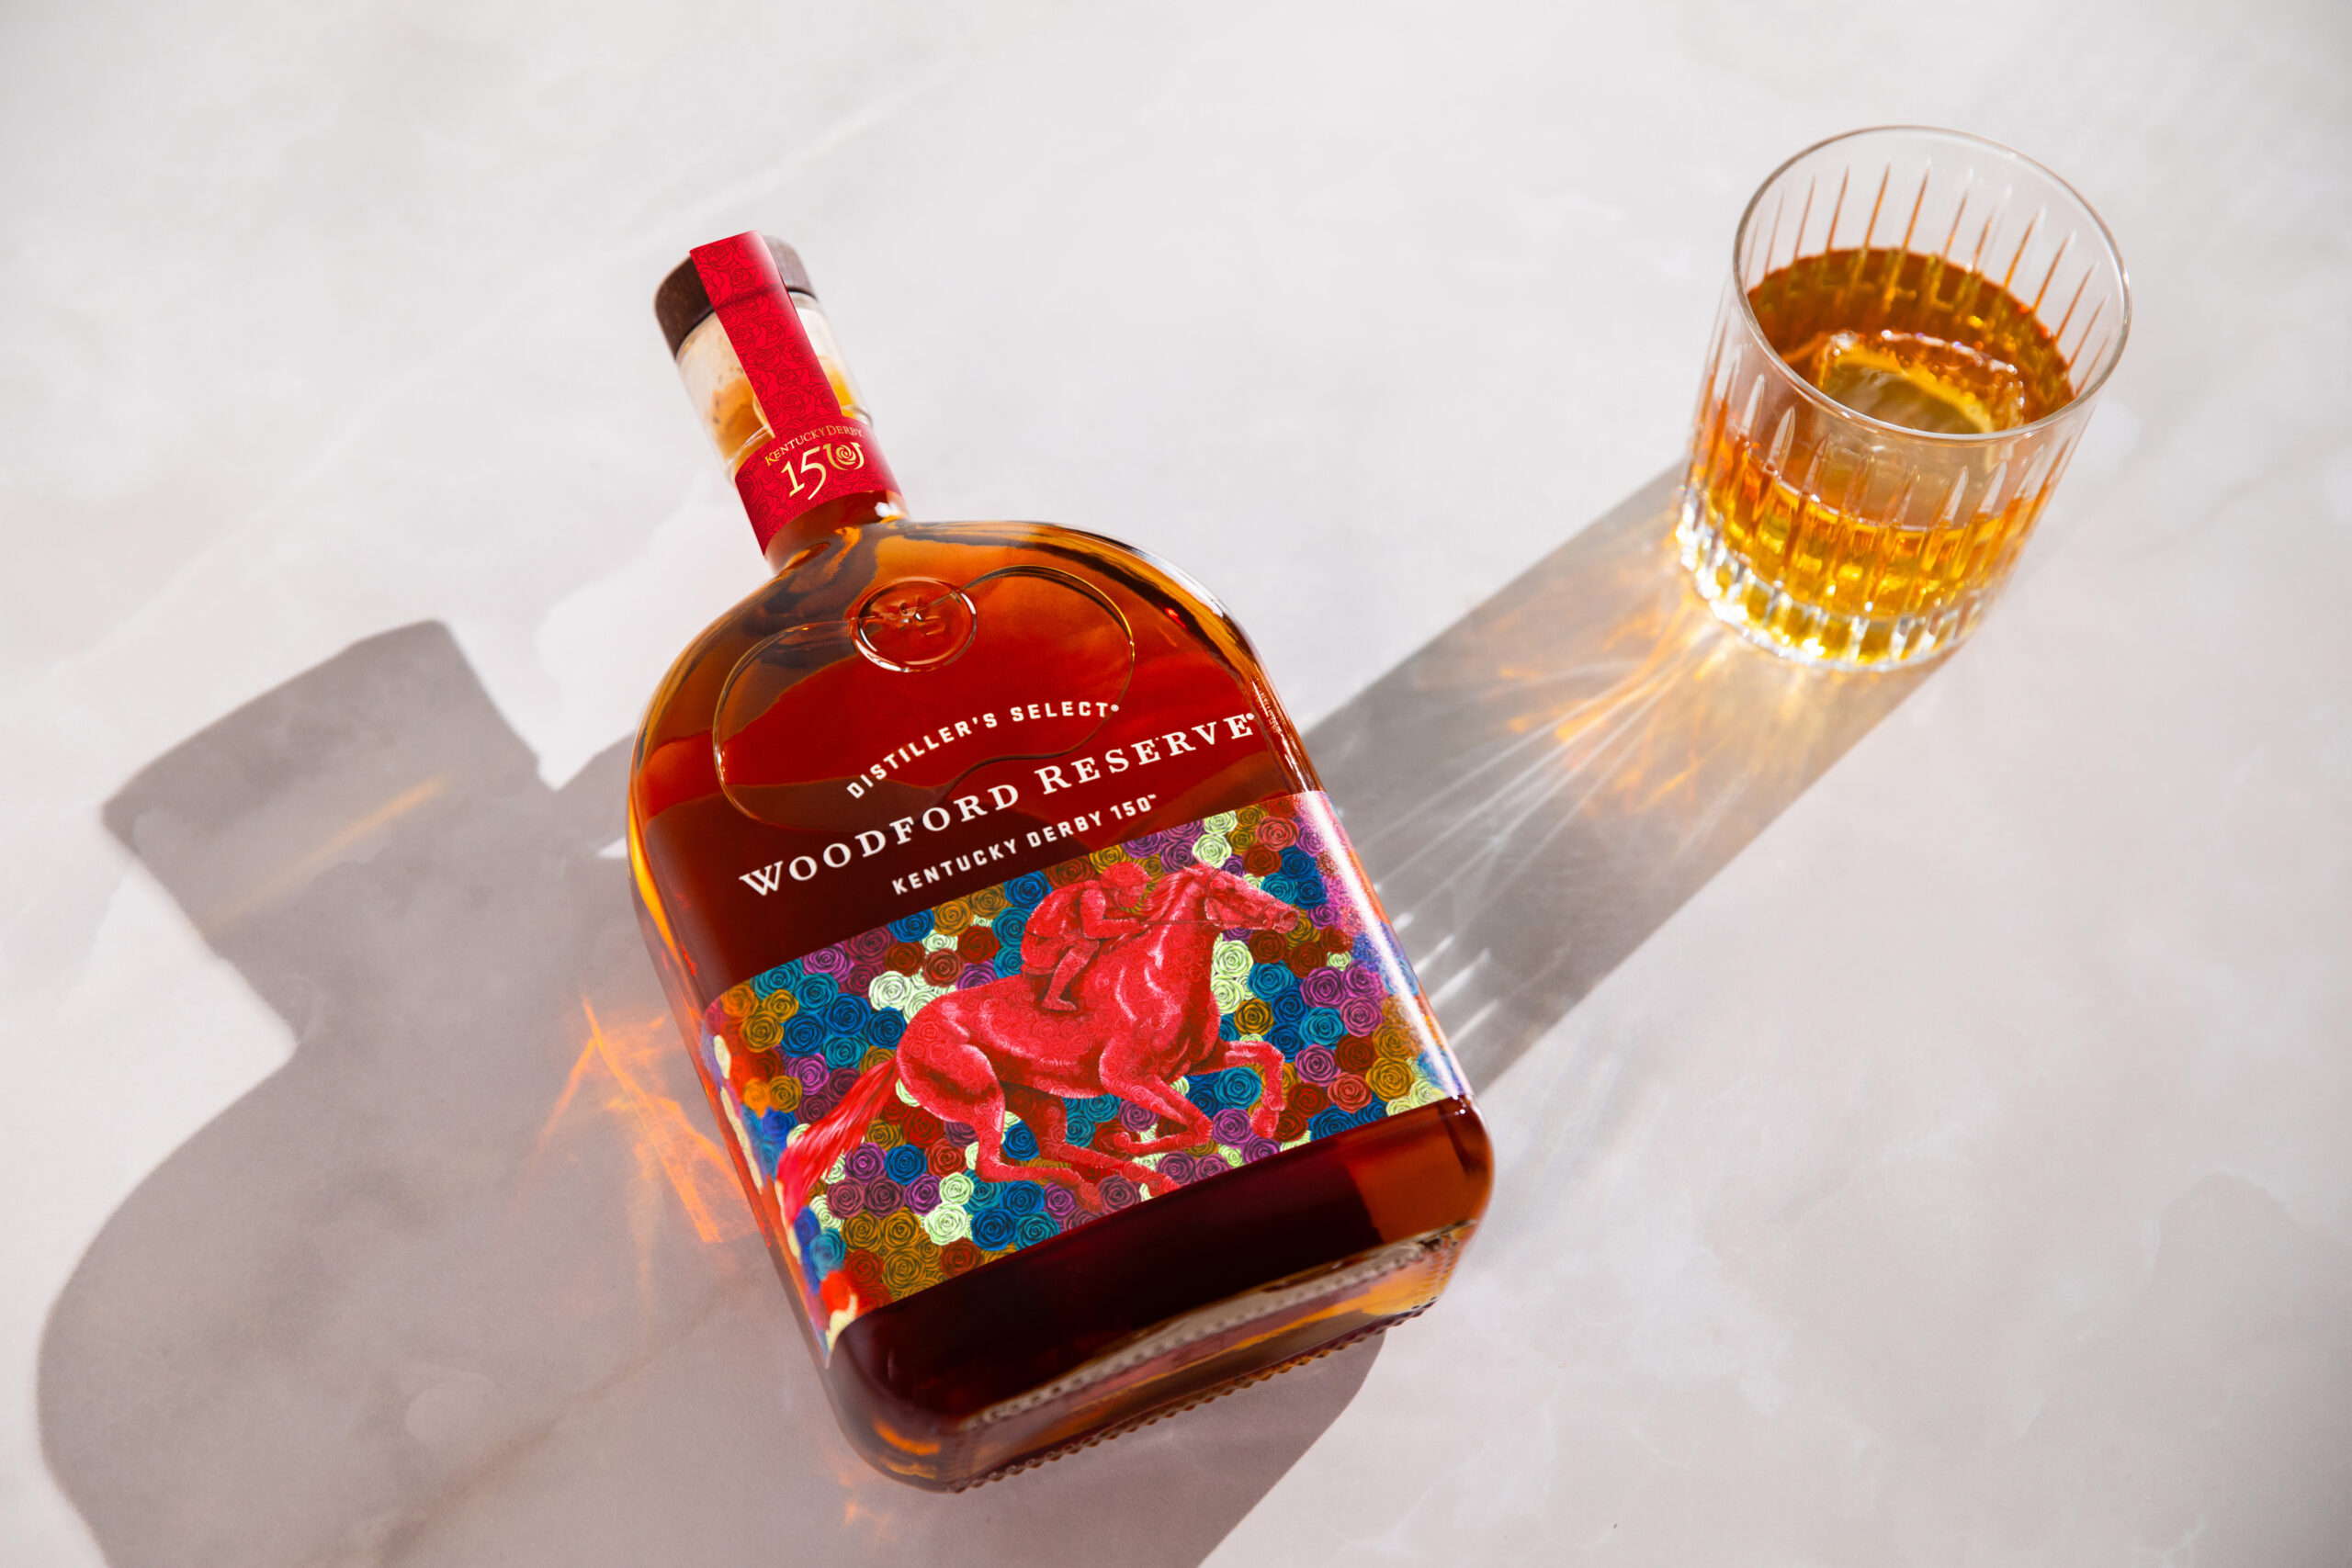 Woodford Reserve Bourbon “Adorned In Roses” By Artist For 150th Kentucky Derby